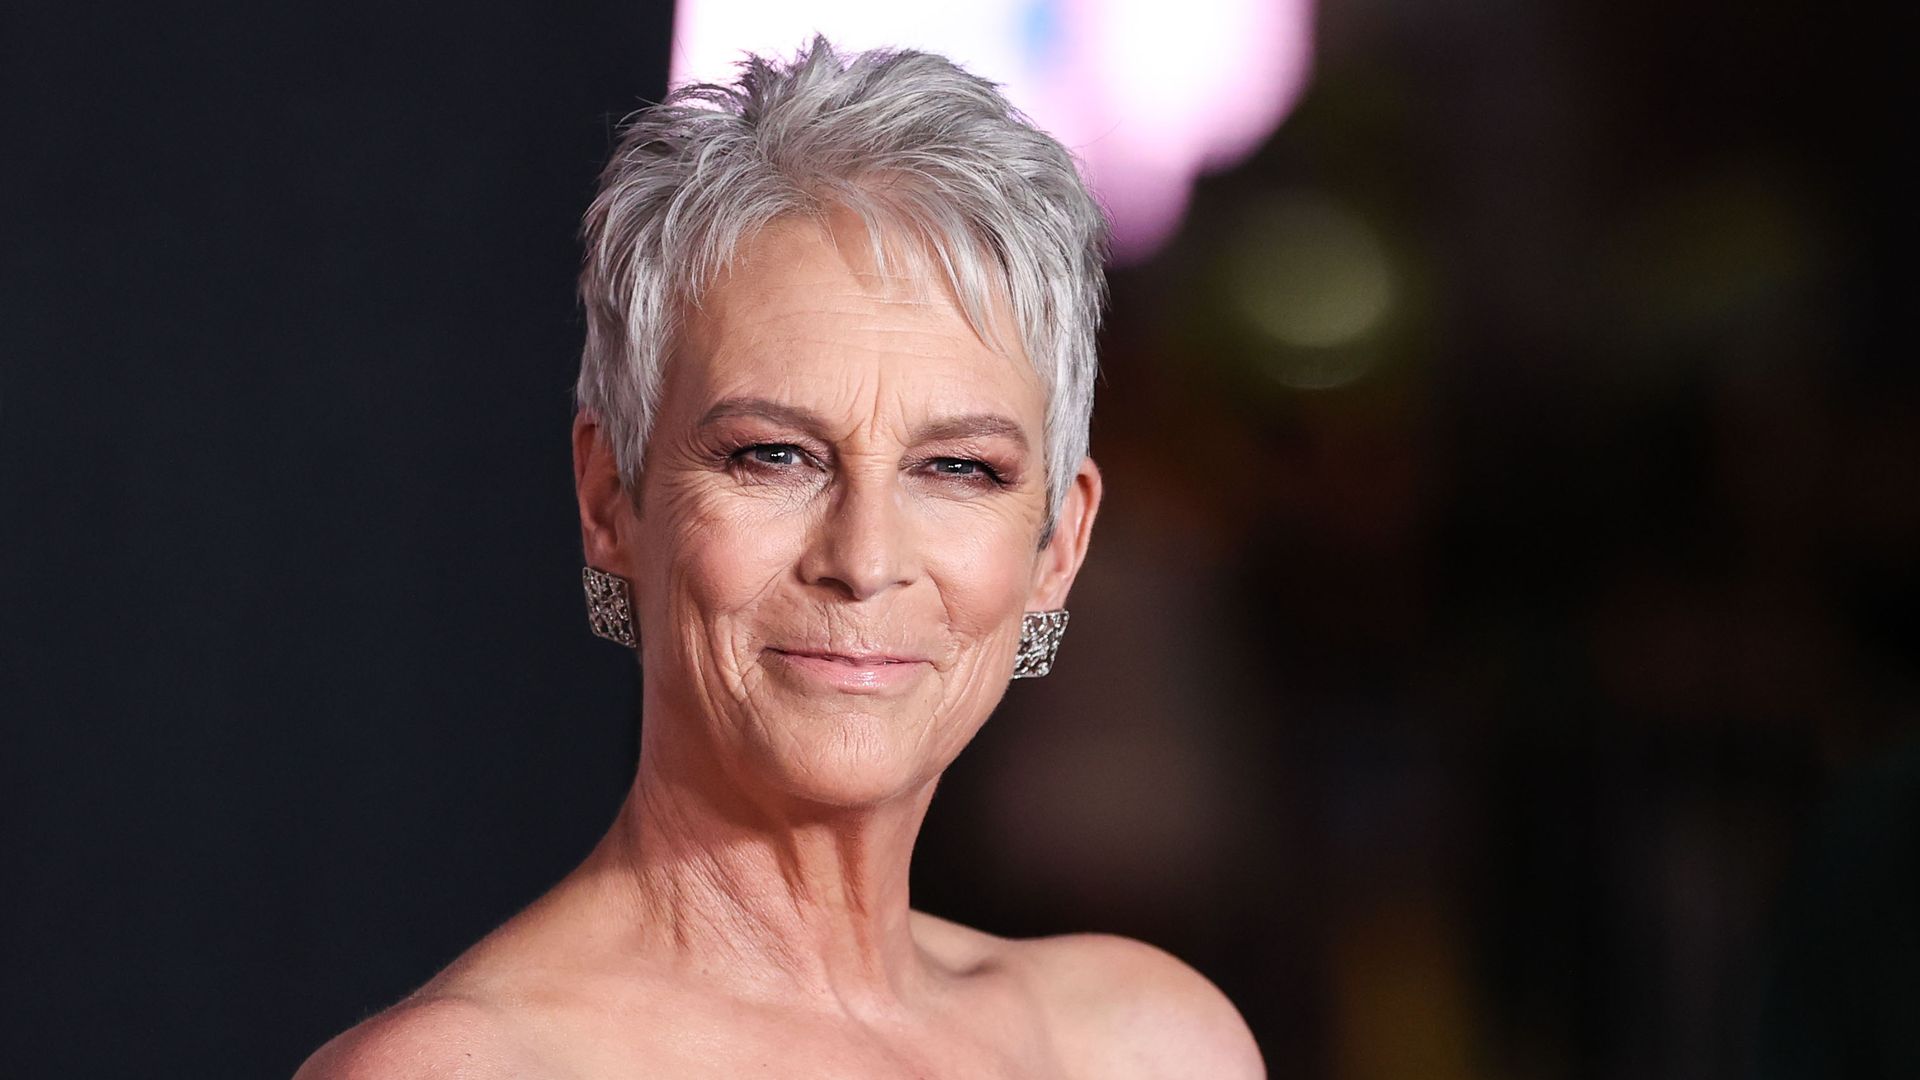 Jamie Lee Curtis (Baroness Haden-Guest) arrives at the World Premiere Of Universal Pictures And Blumhouse Productions' 'Halloween Ends' held at the TCL Chinese Theatre IMAX in Hollywood, Los Angeles, California, United States.